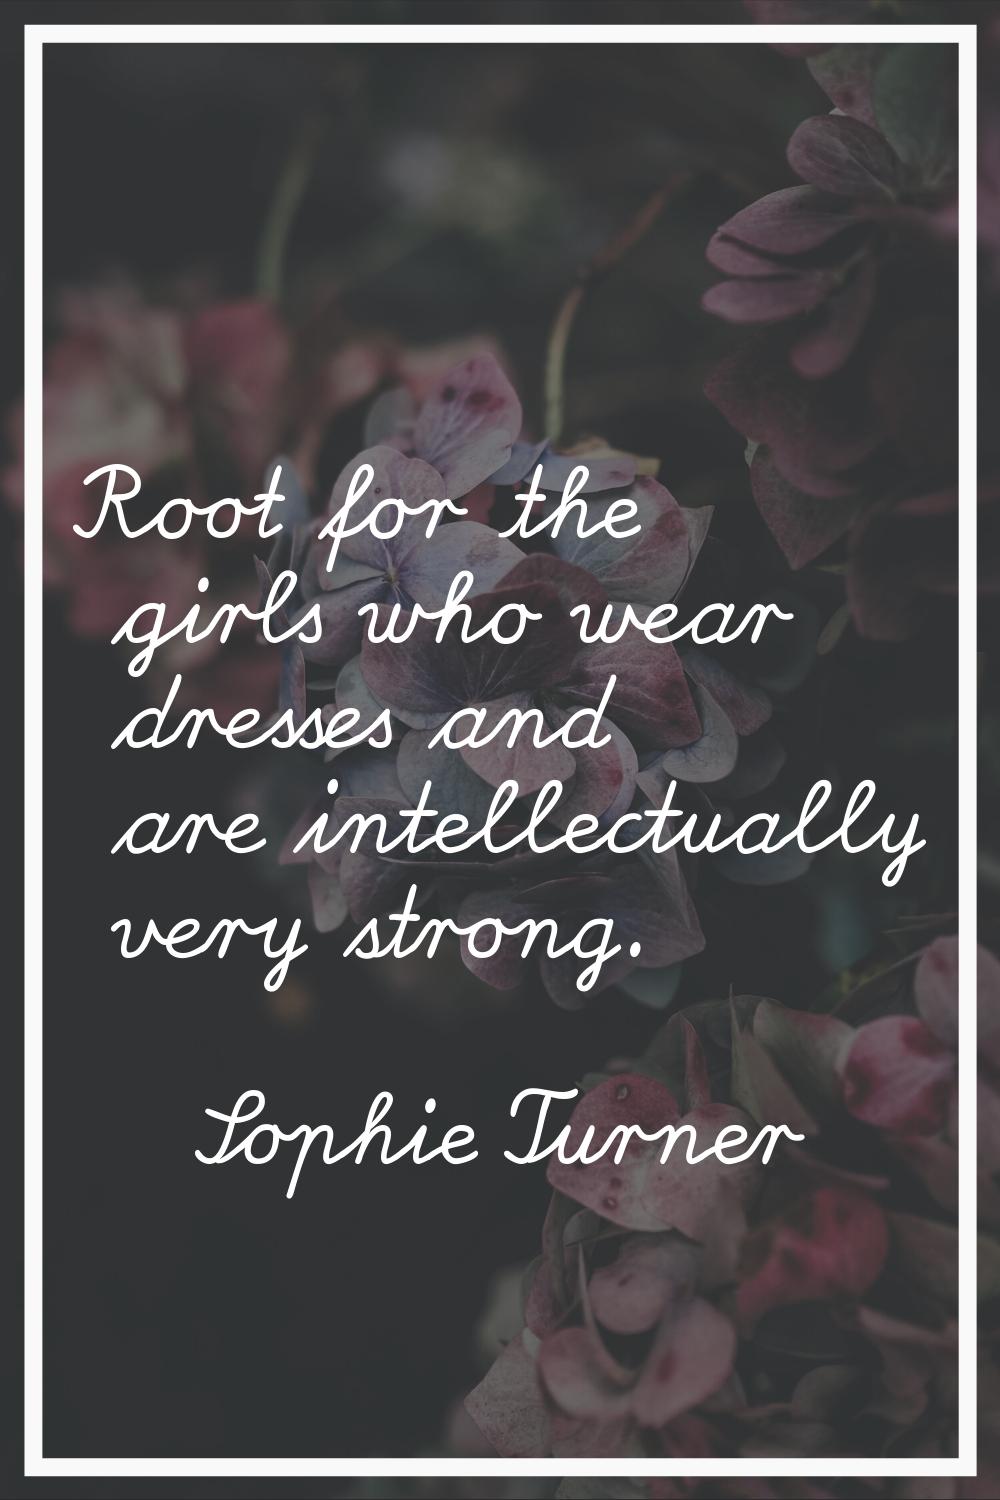 Root for the girls who wear dresses and are intellectually very strong.